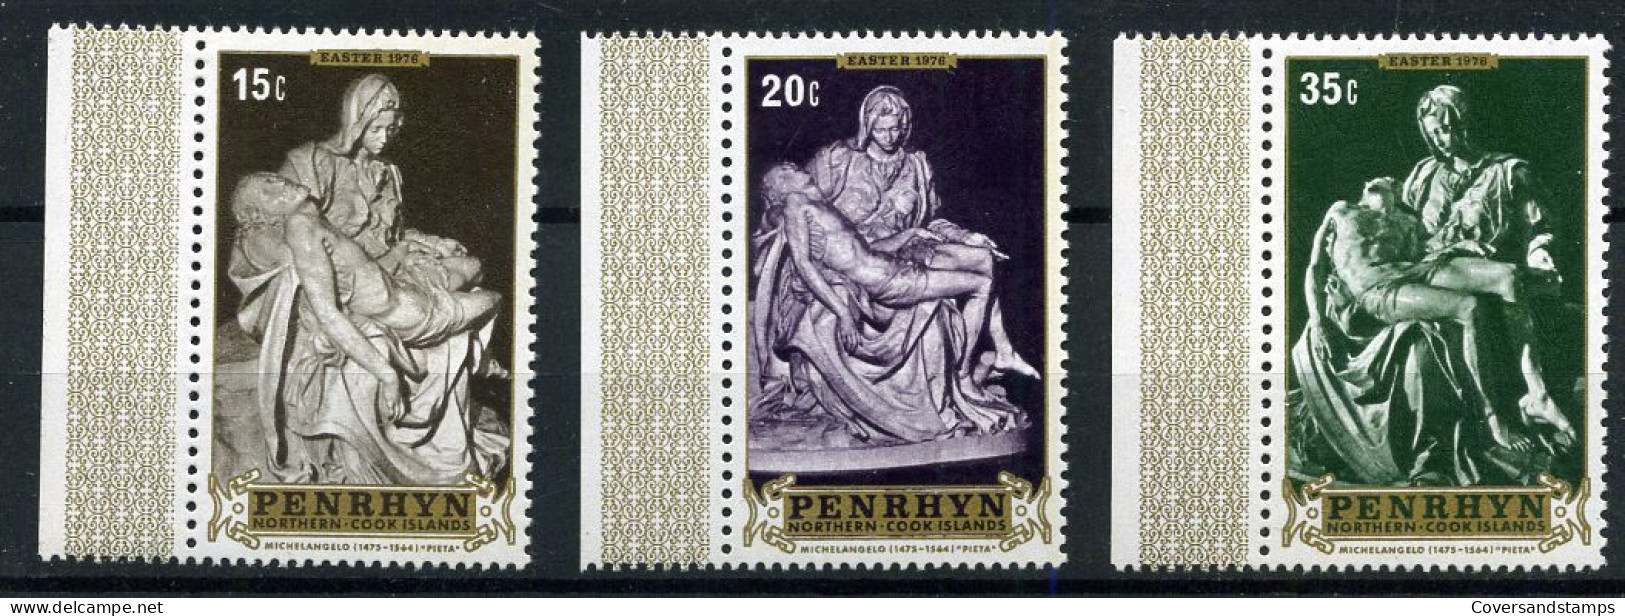 Penrhyn - Stamps 500 Th Anniversary Of The Birth Of Michelangelo - MNH - Islas Cook